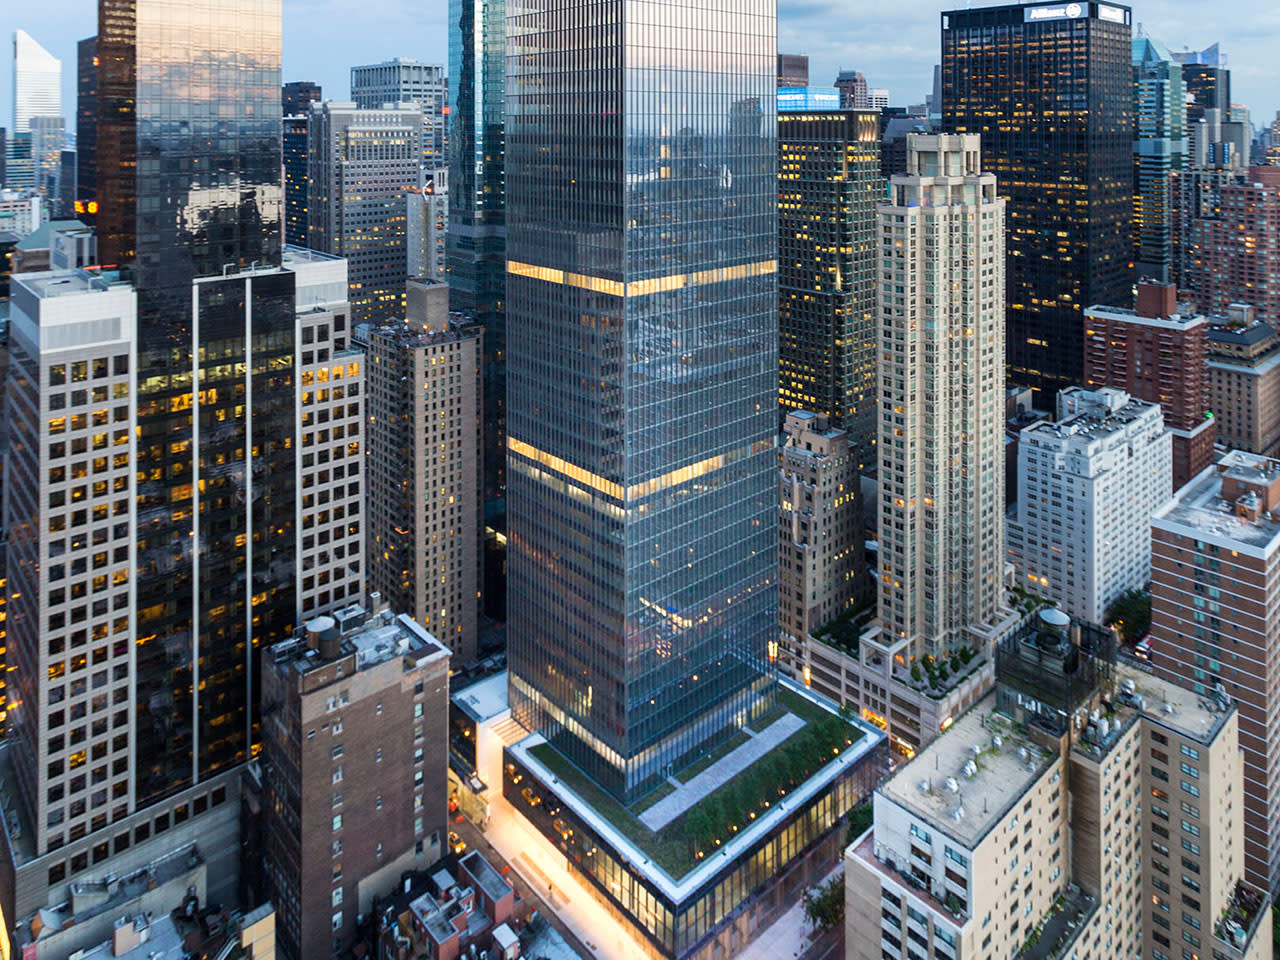 Aerial view of New York skyscrapers